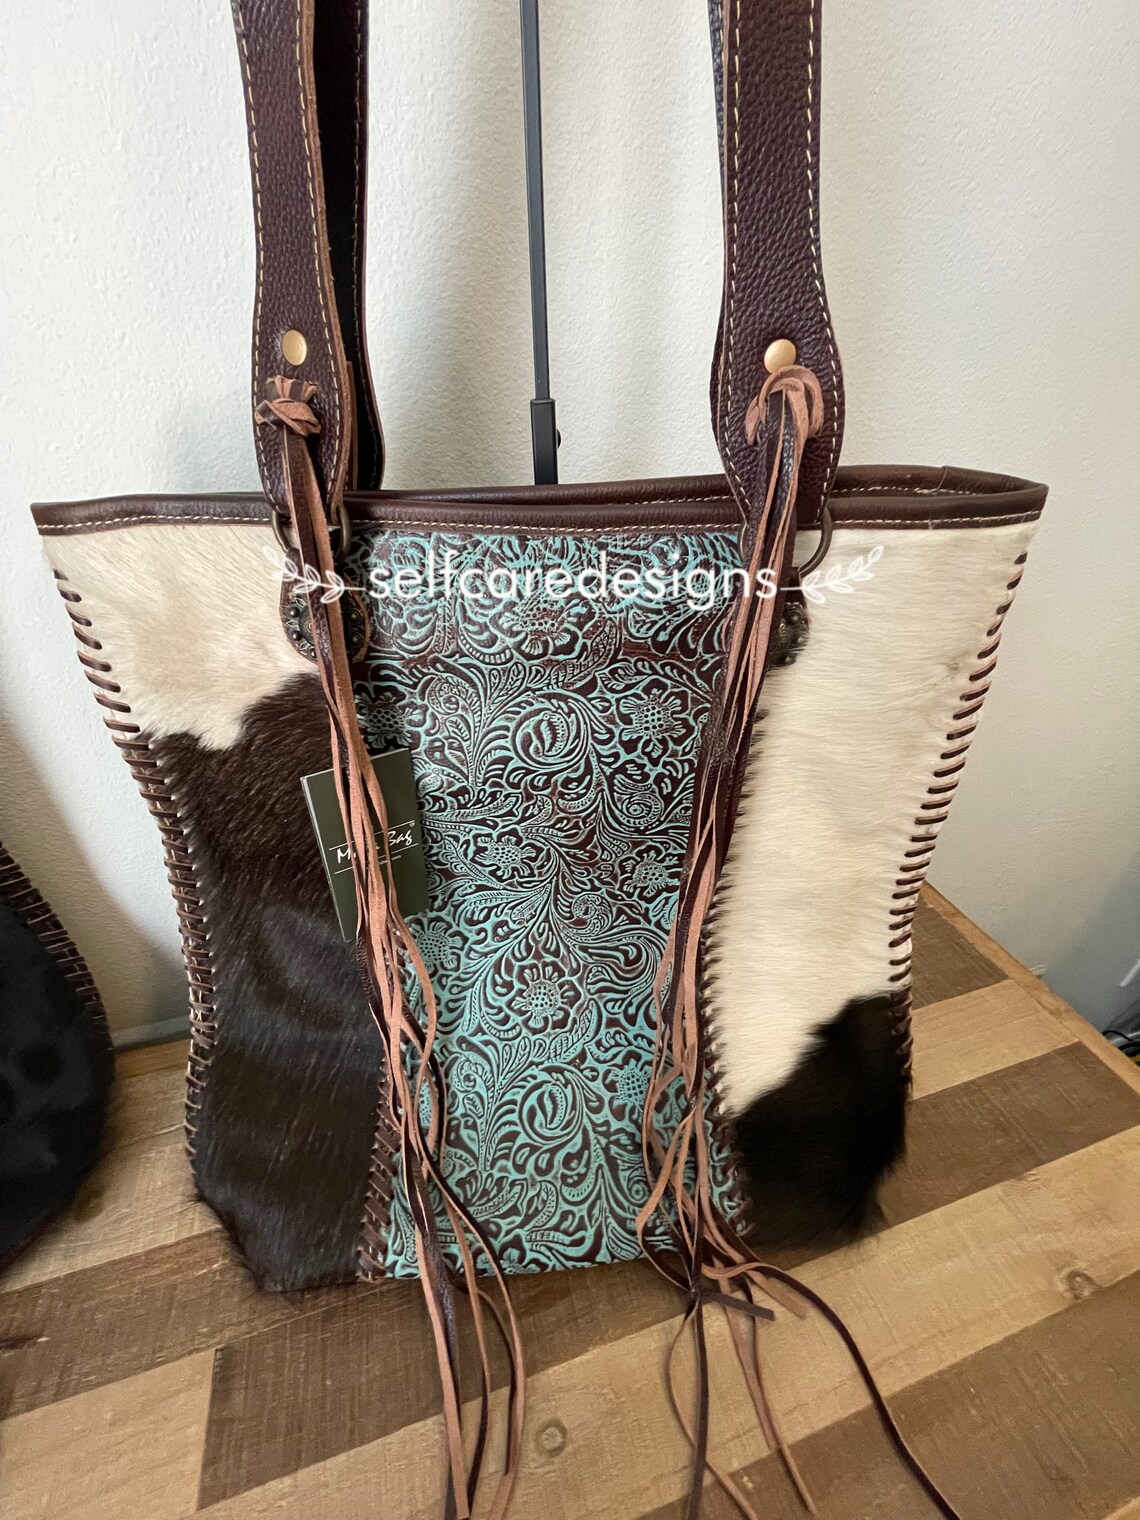 Myra bag blue ripples bag cowhide leather tote tooled | Etsy